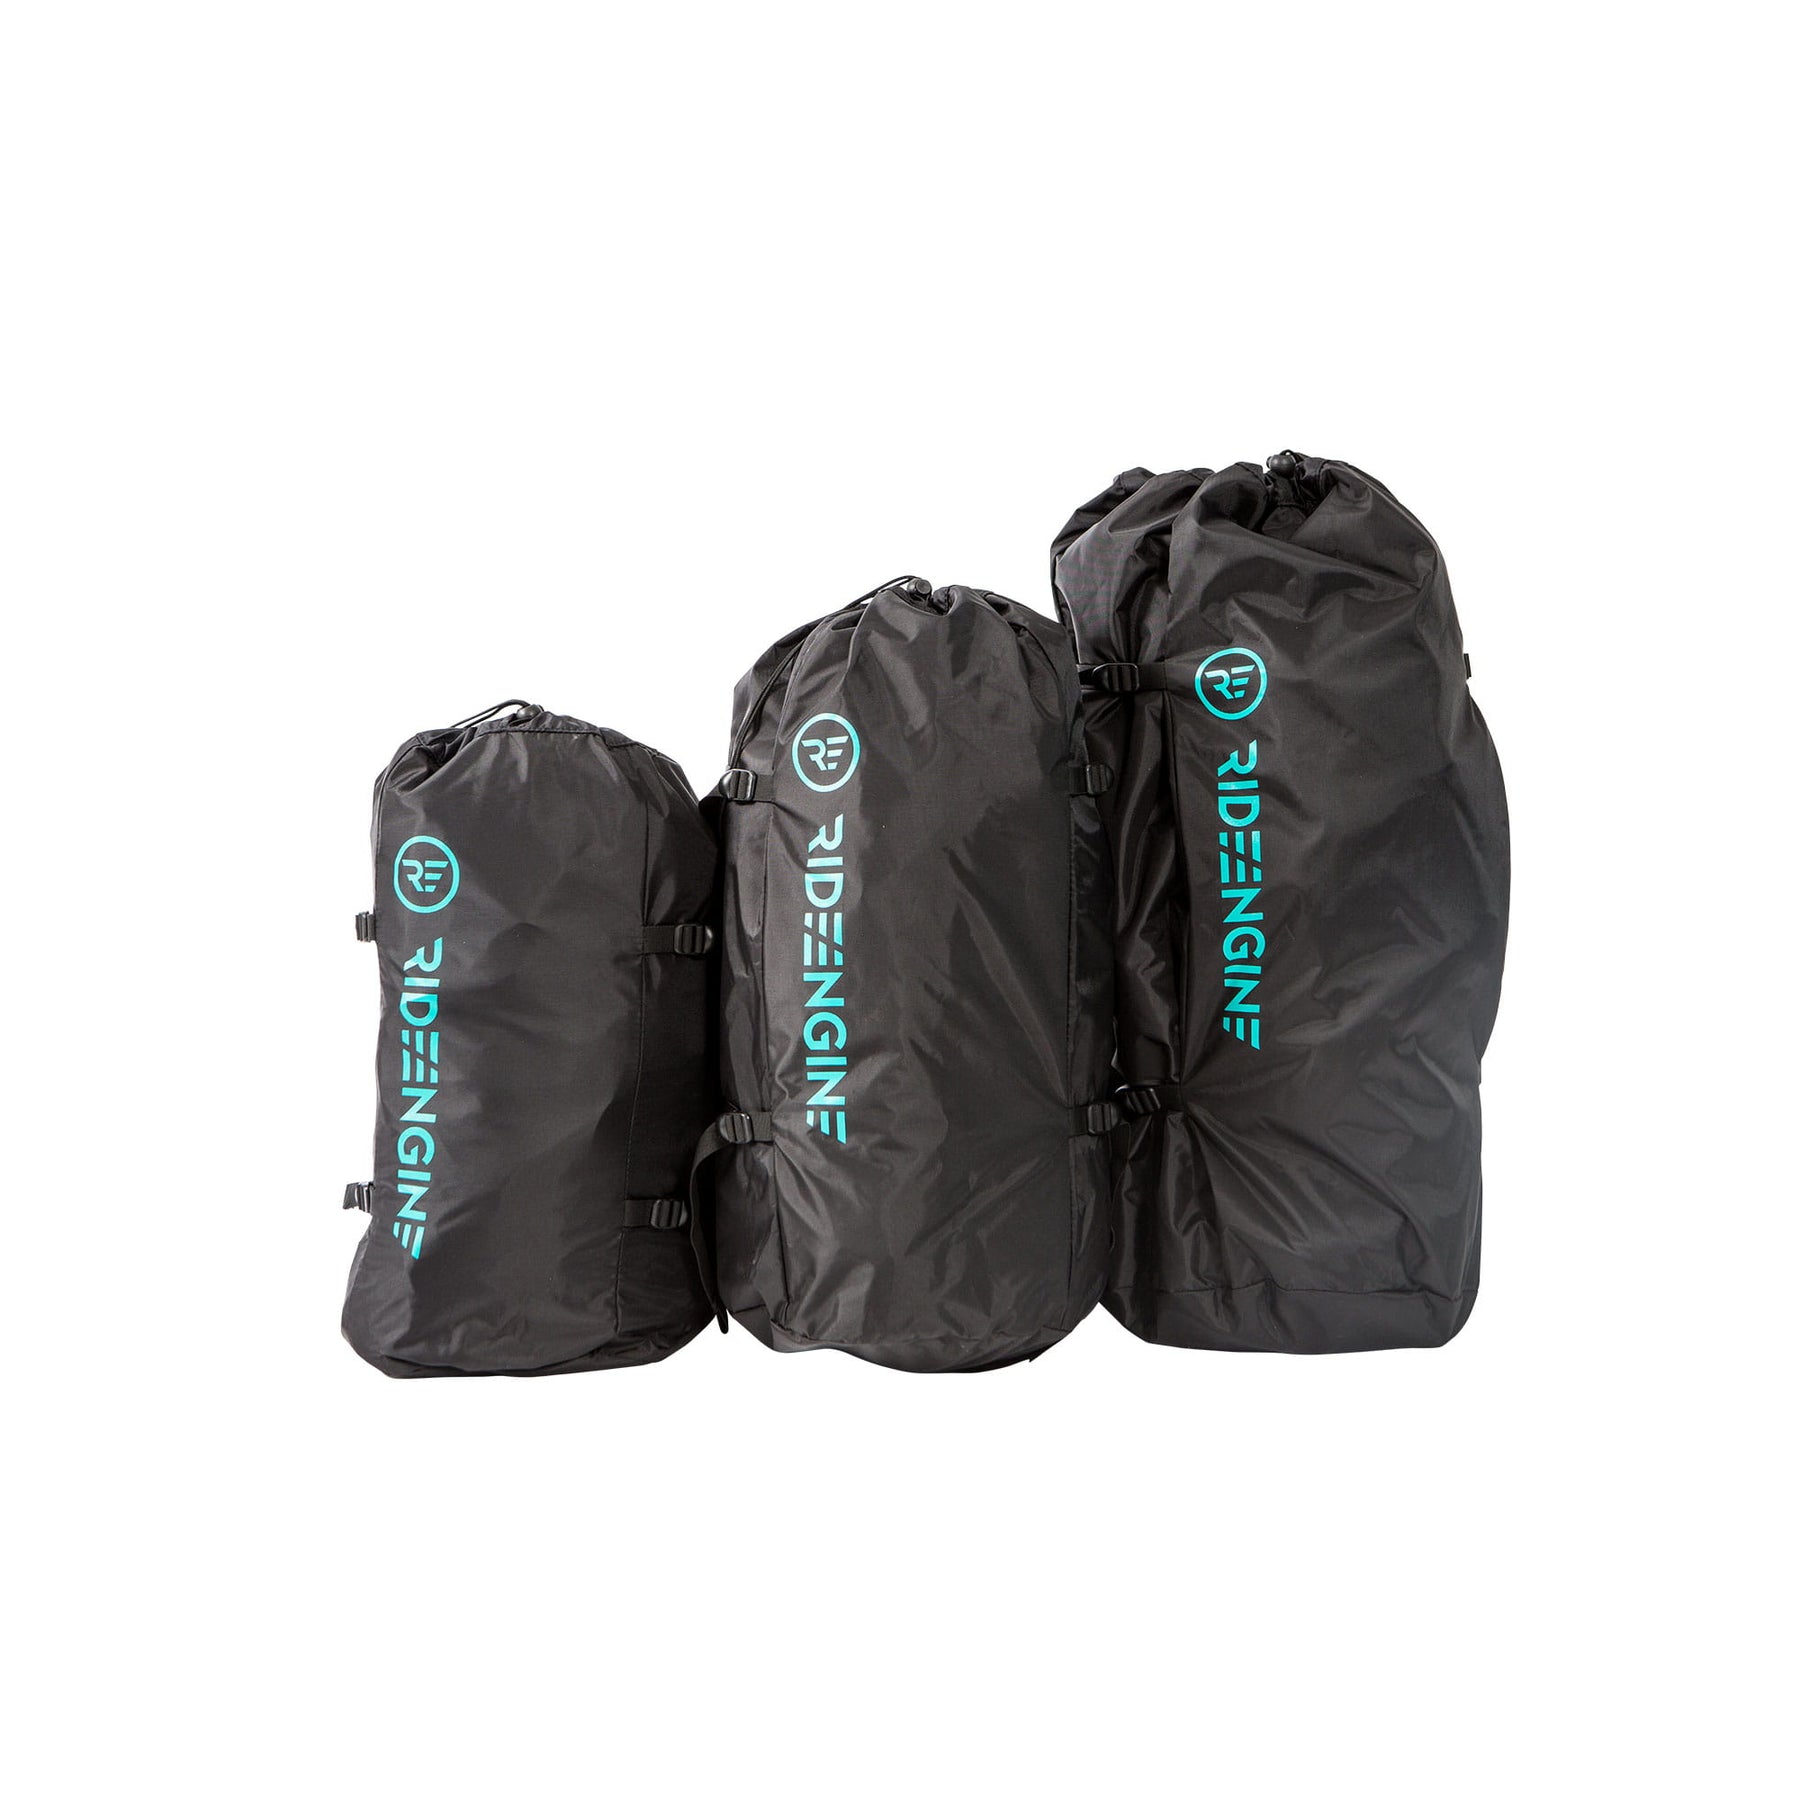 Let's Roll! Re-Useable Compression Packing Bags – 12 Pack